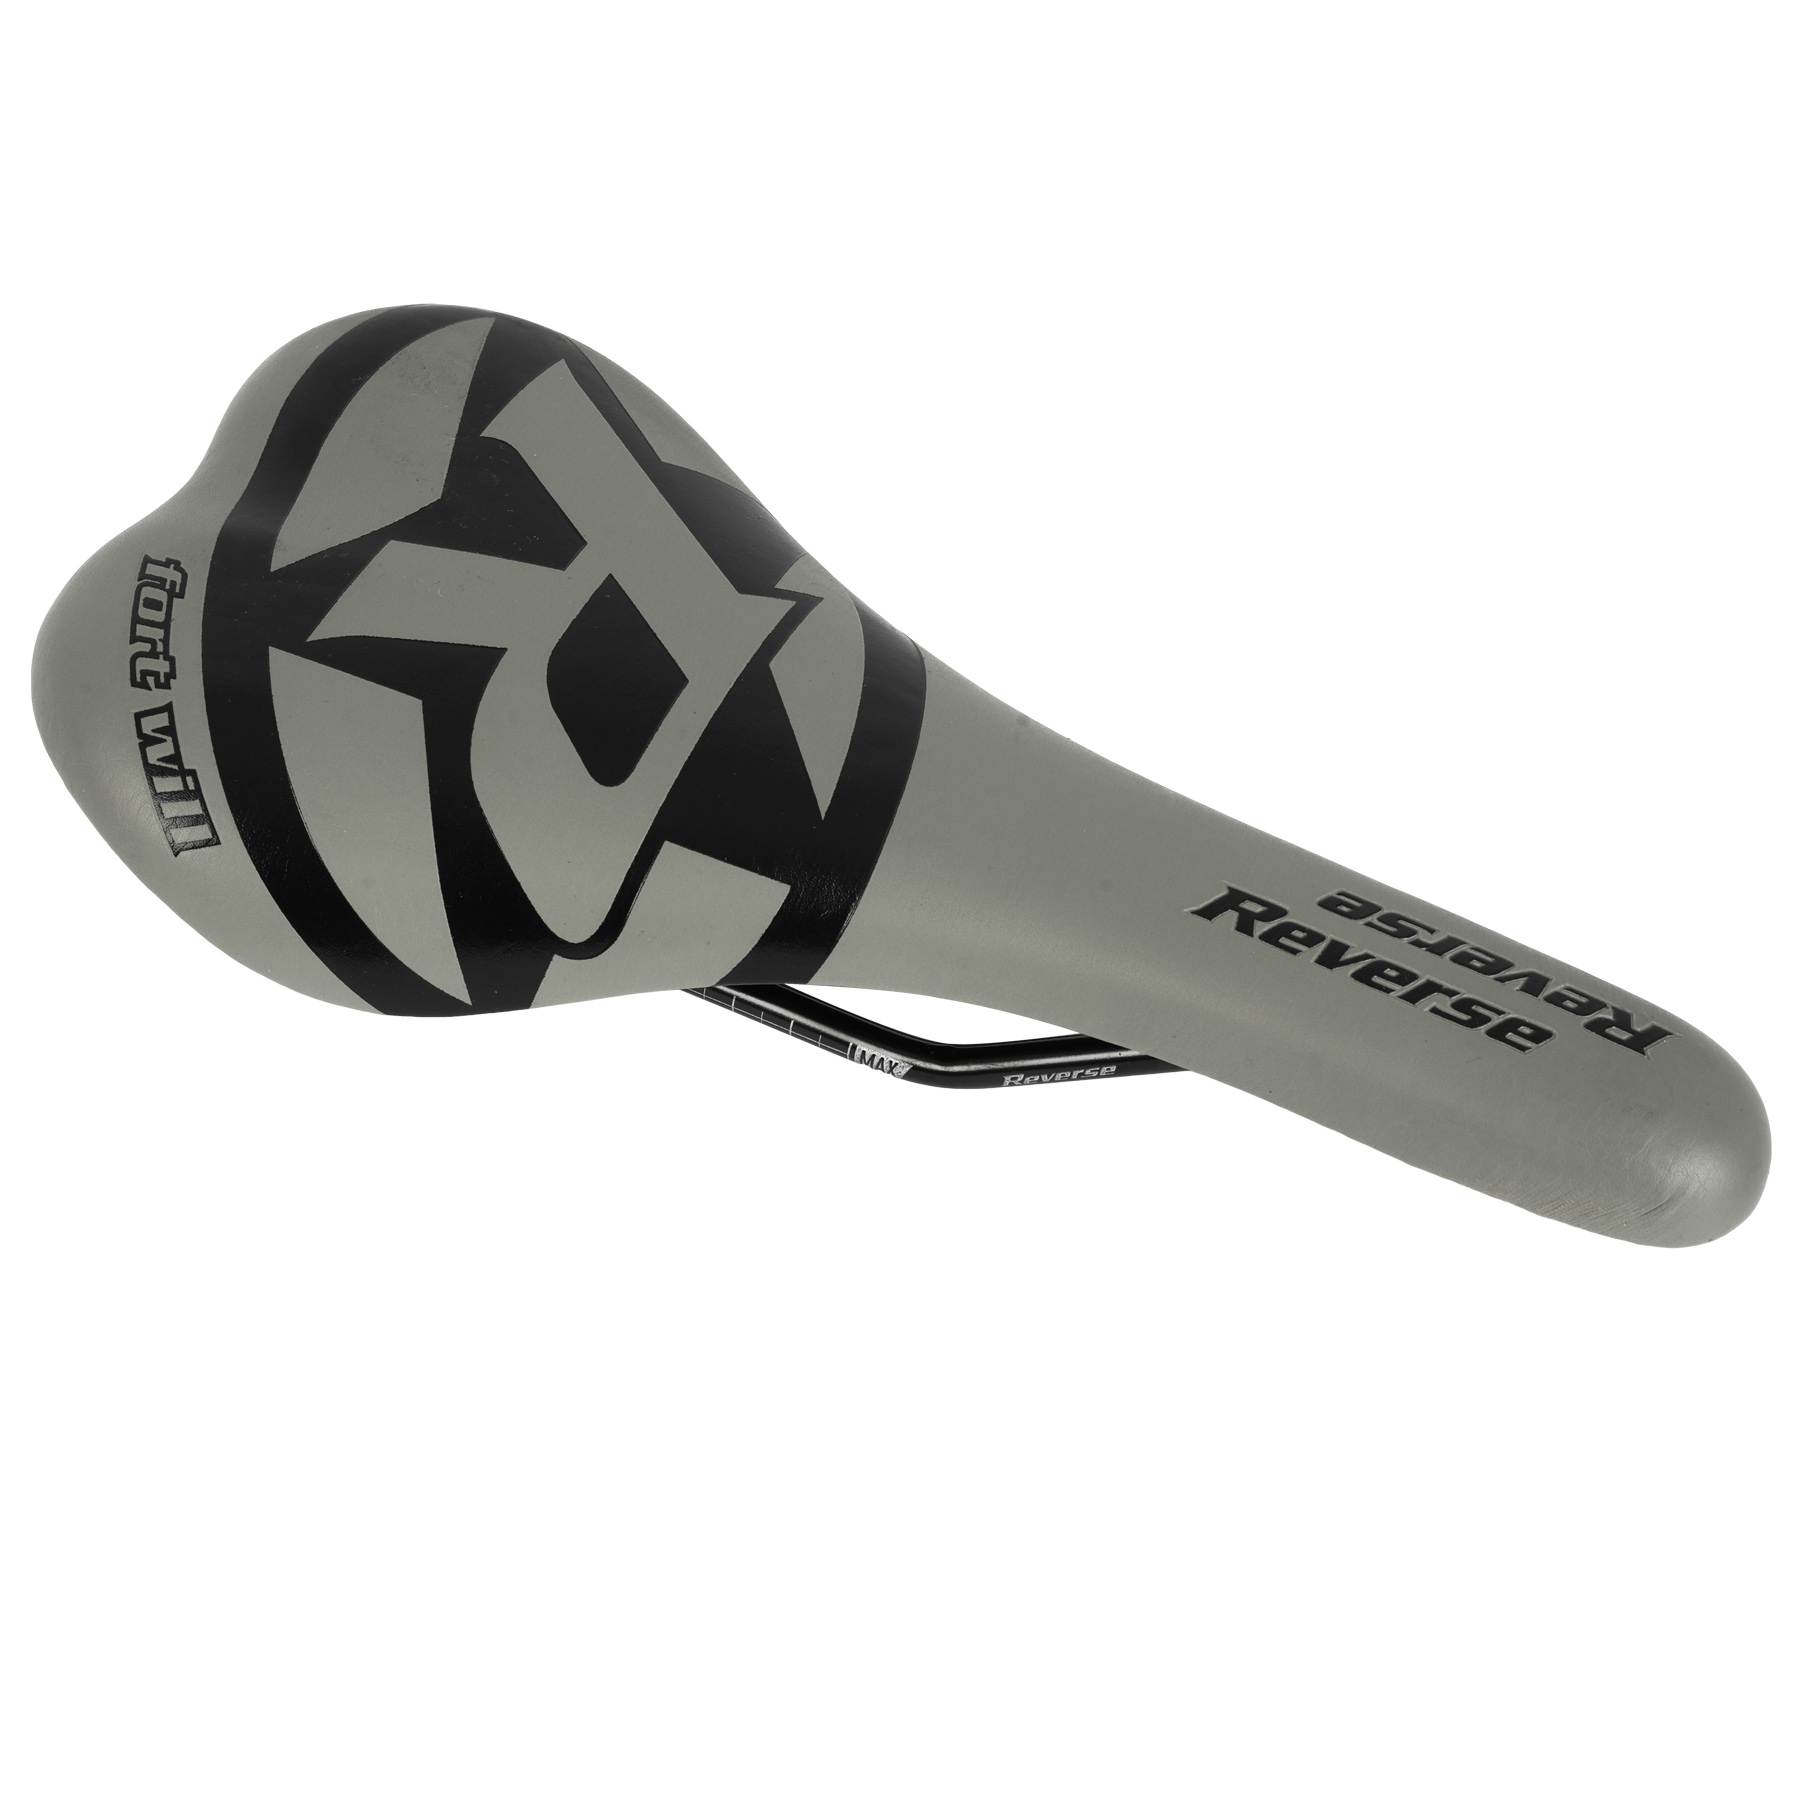 Picture of Reverse Components Fort Will Saddle CrMo Style - grey / black